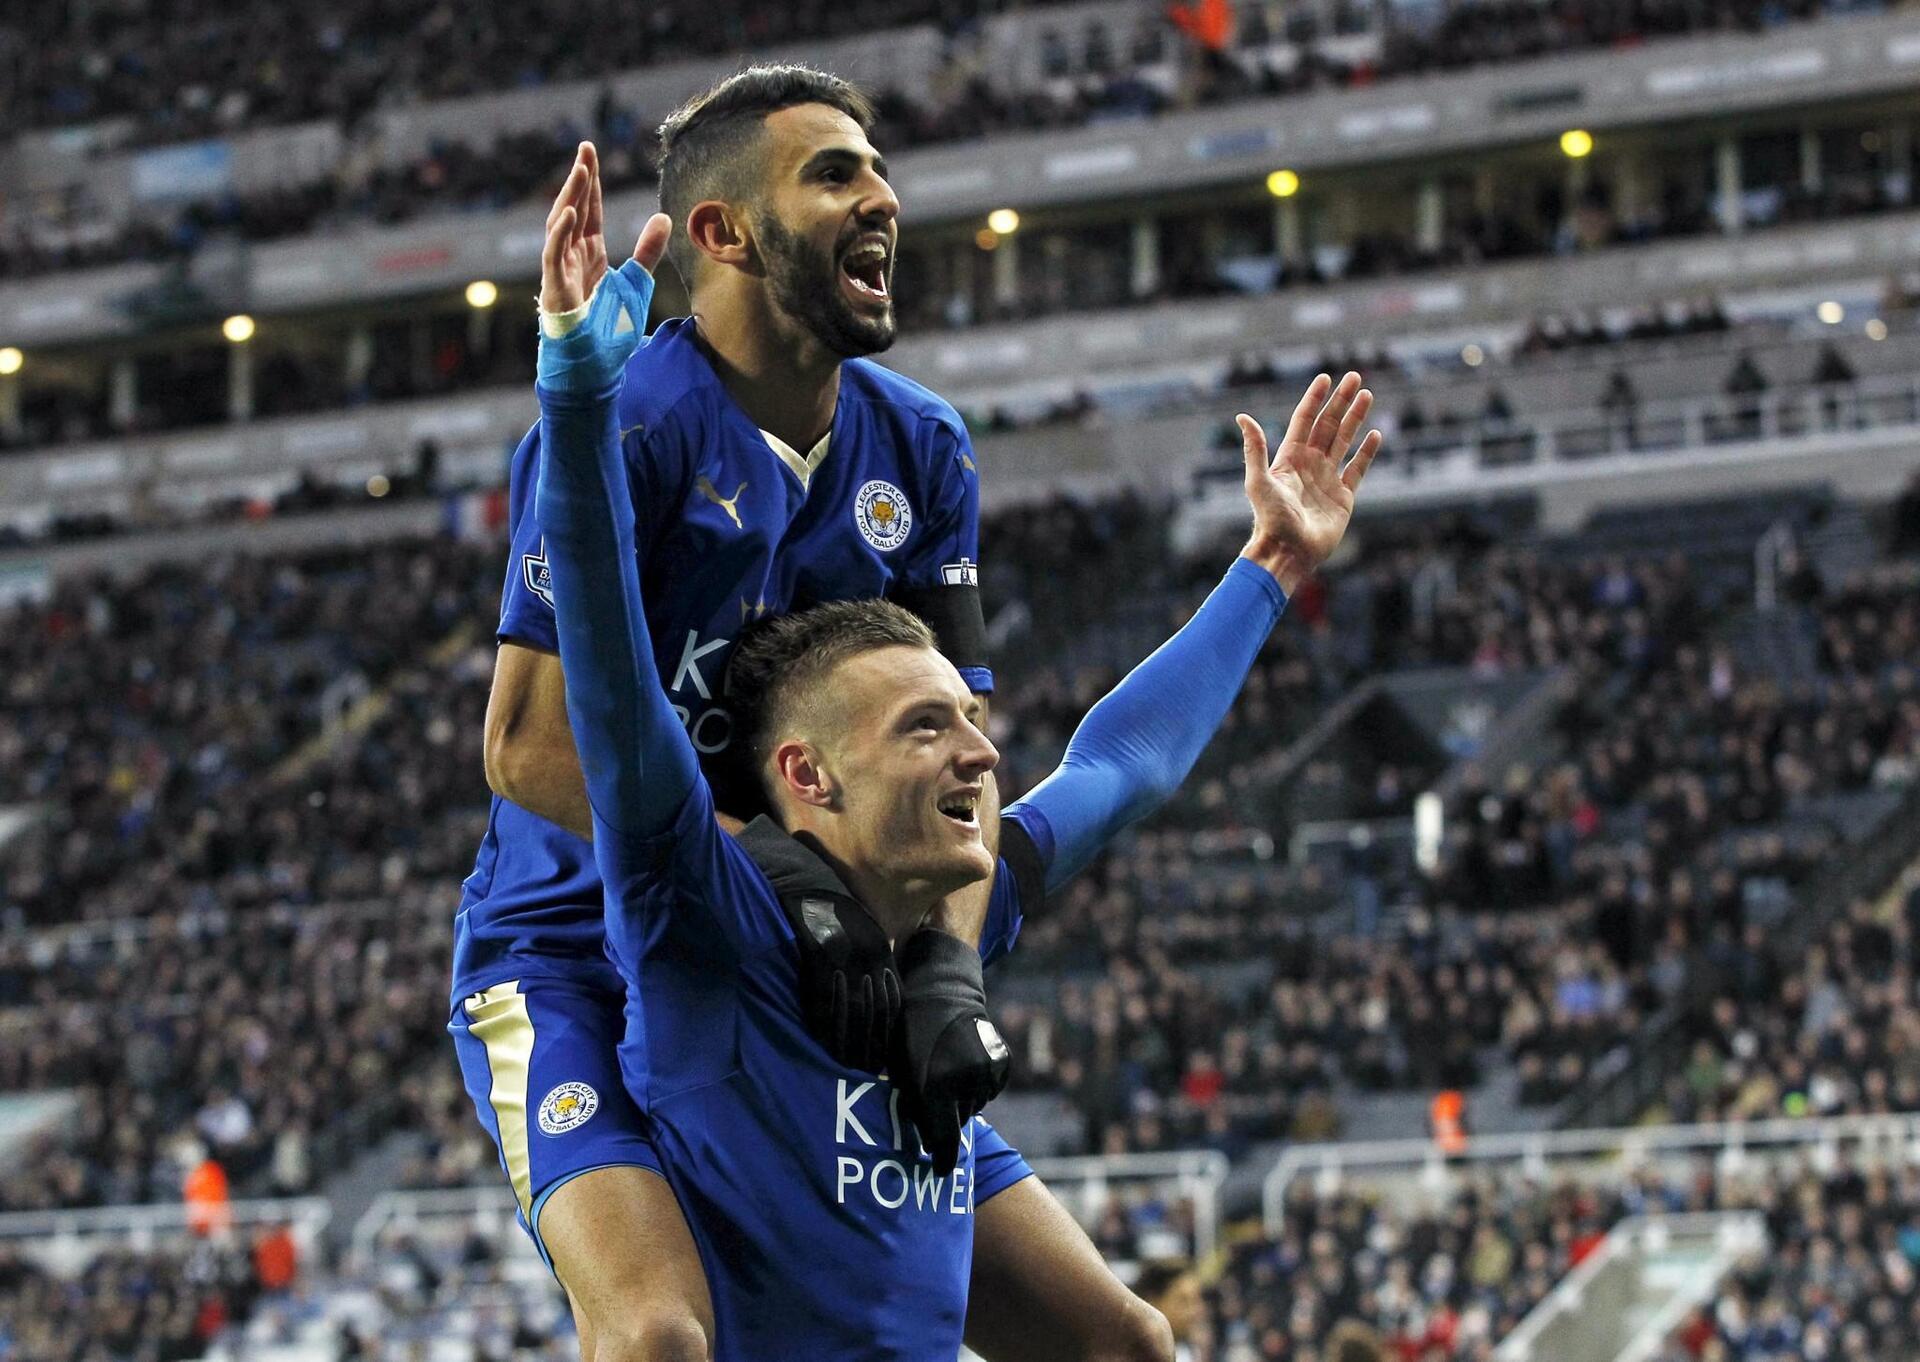 File photograph of Vardy celebrating with Mahrez after scoring the first goal for Leicester City during their English Premier League soccer match against Newcastle United